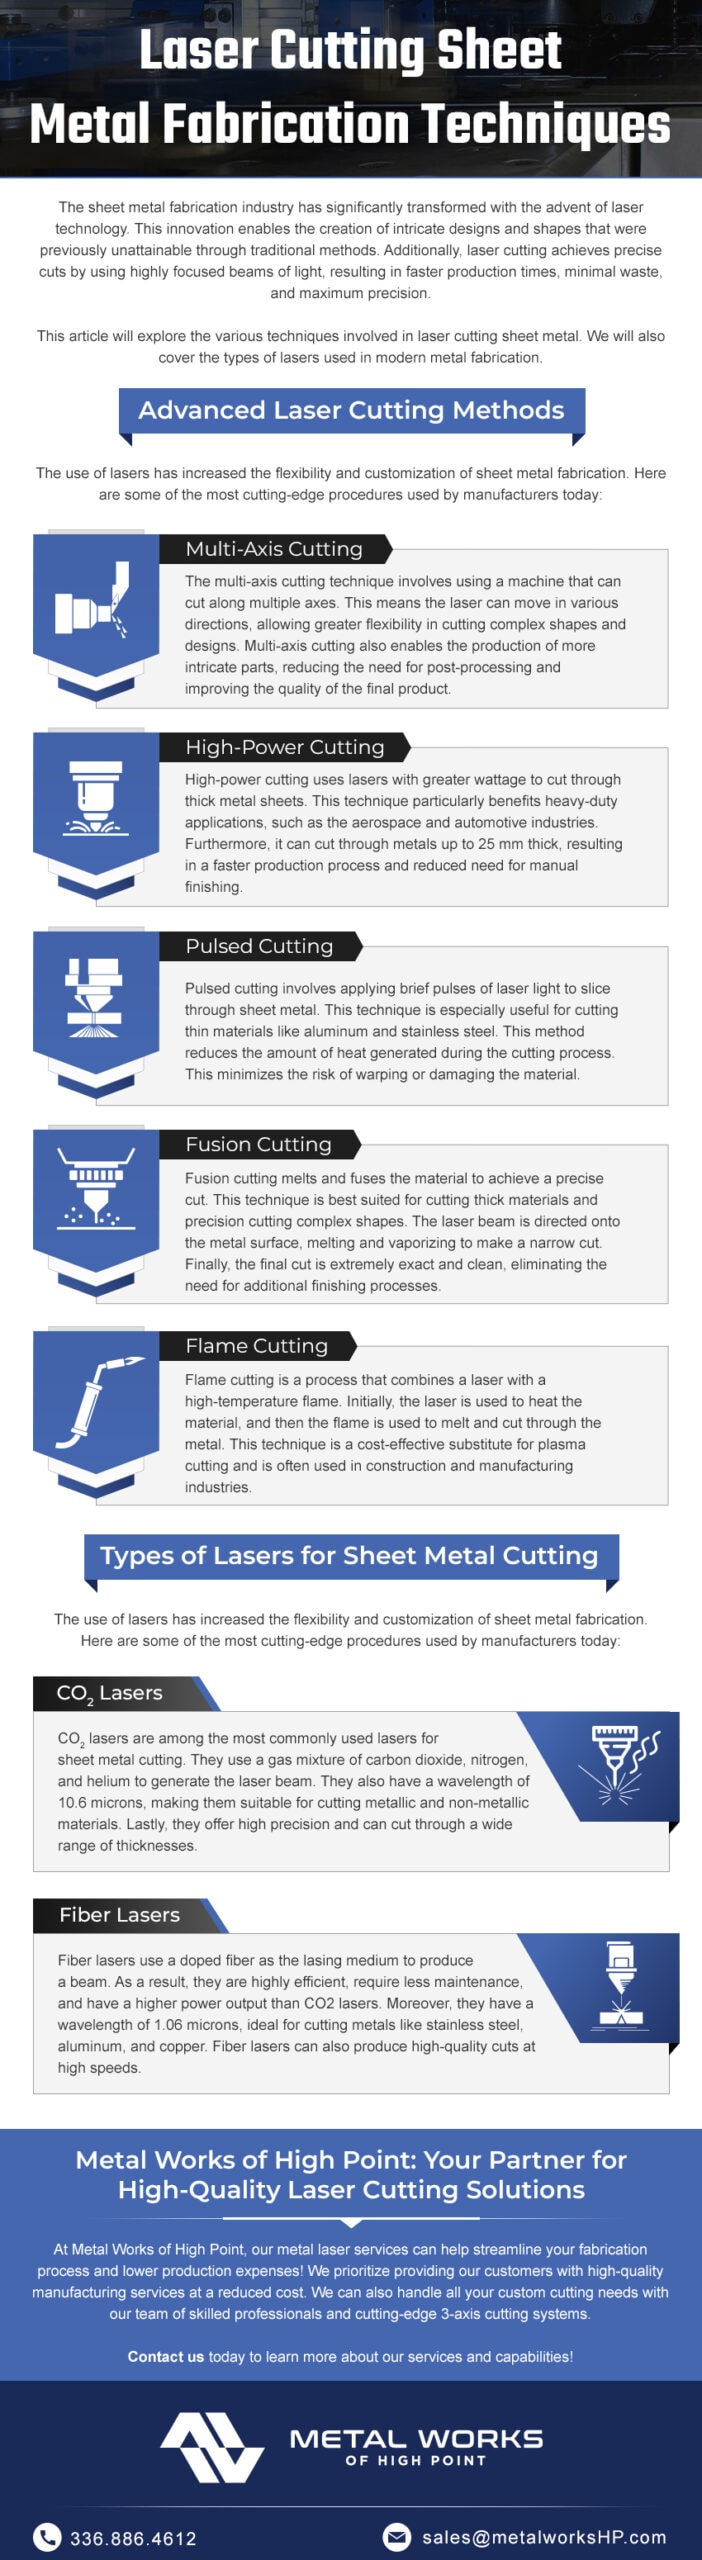 Laser-Cutting-Sheet-Metal-Fabrication-Techniques-scaled